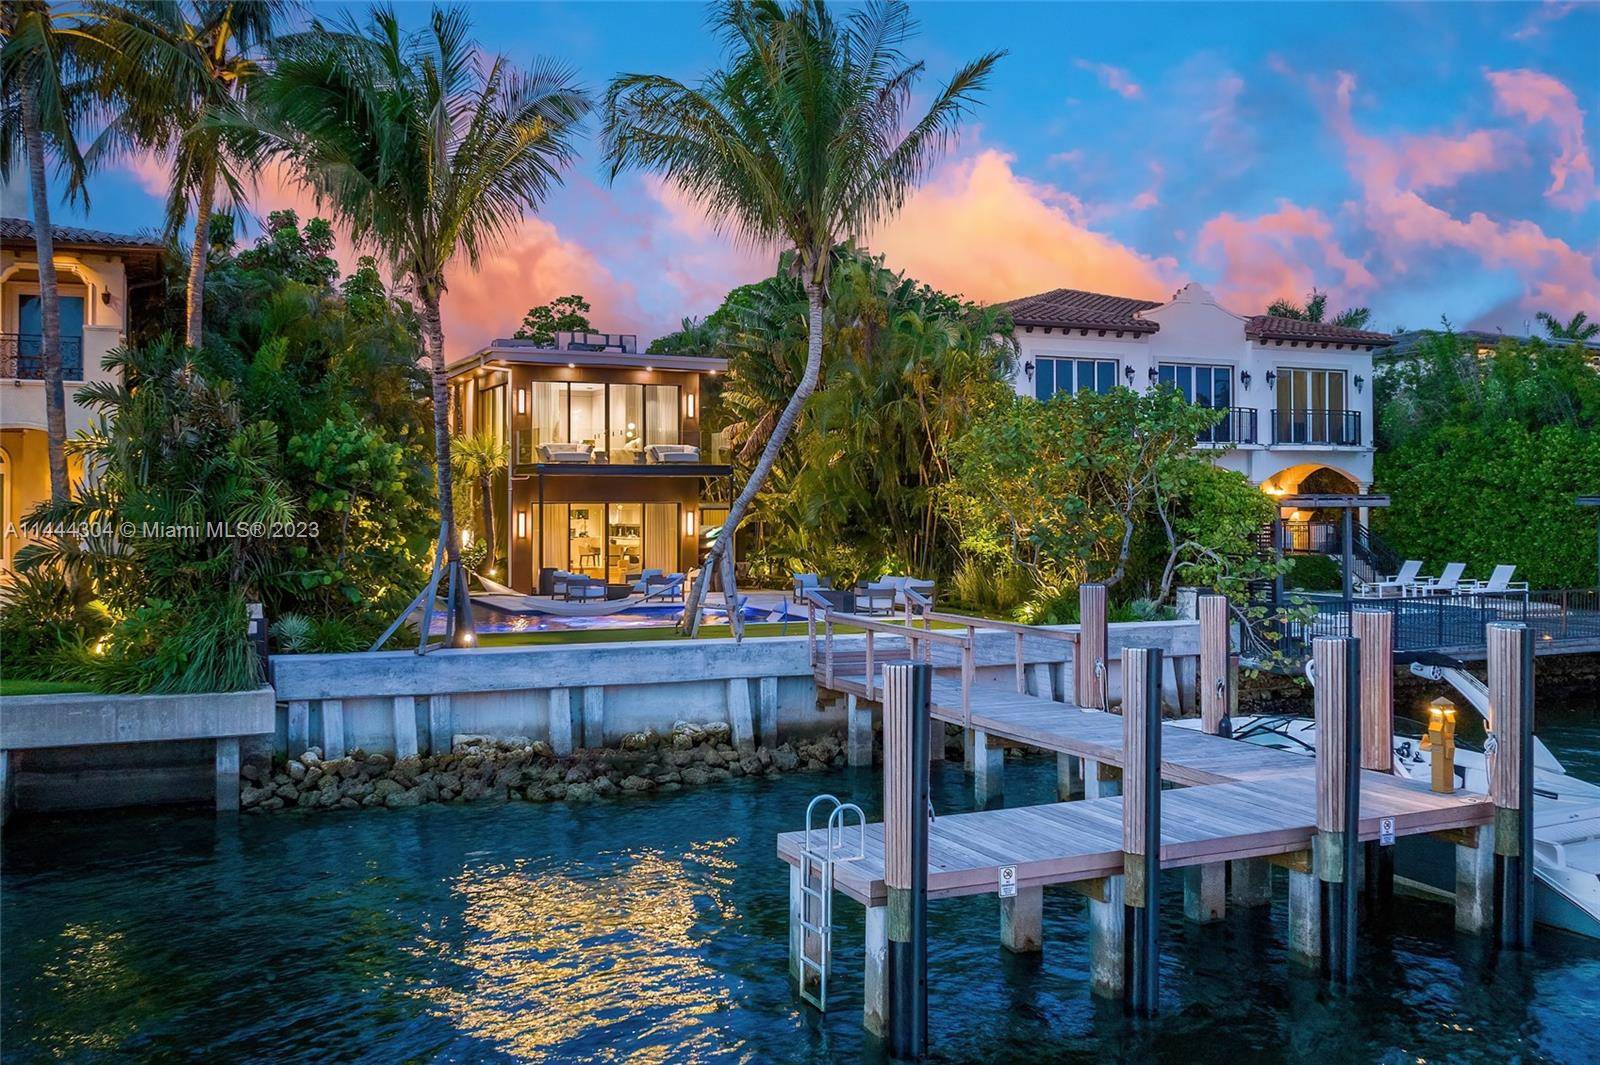 Welcome to your fully updated waterfront sanctuary in the heart of Miami Beach.